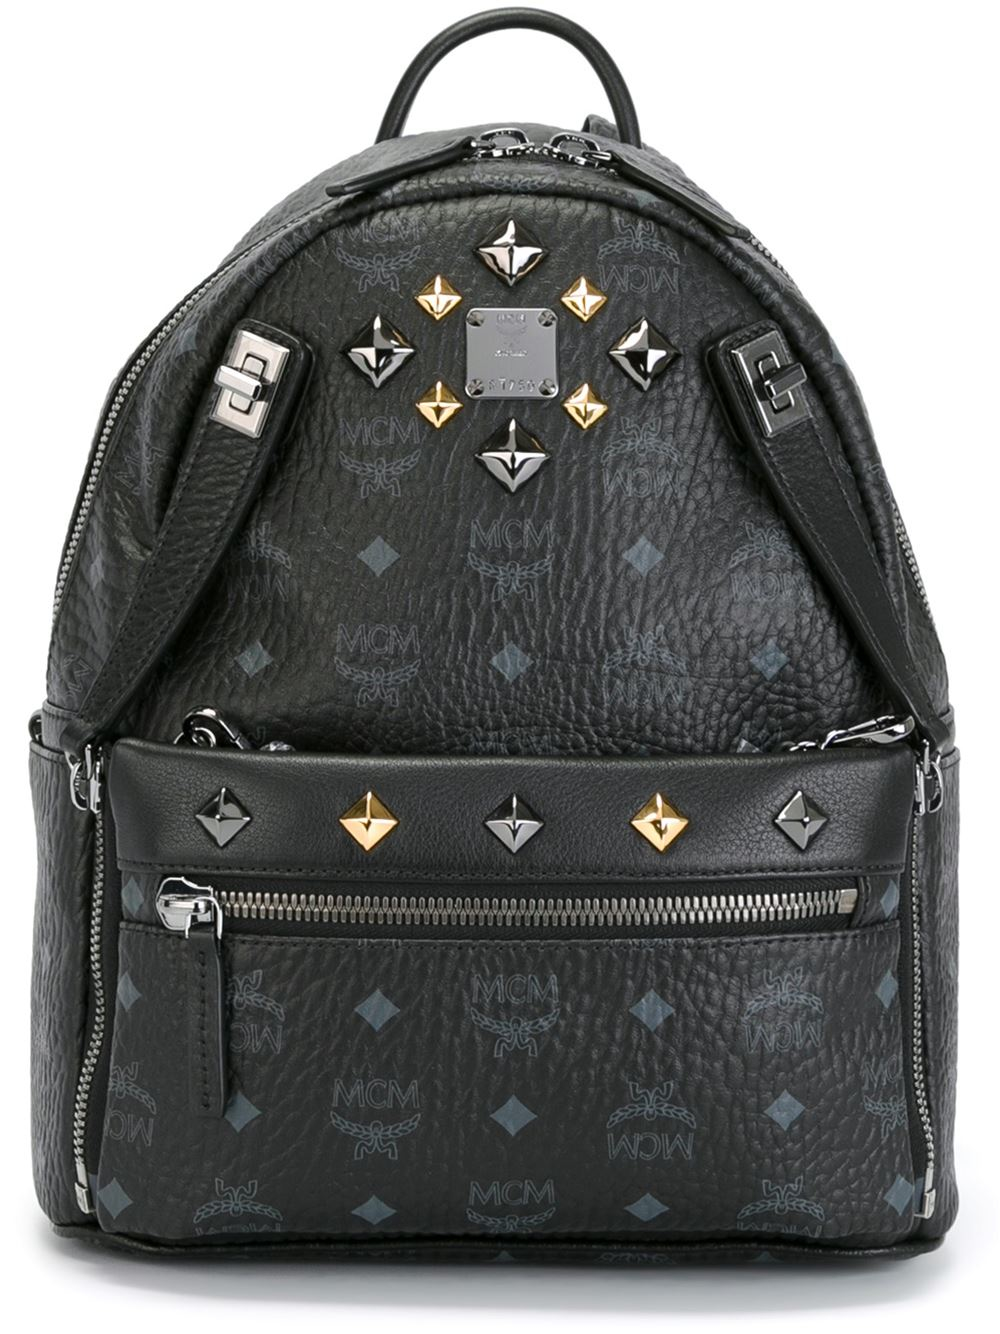 Mcm Small 'Dual Stark' Backpack in Black | Lyst